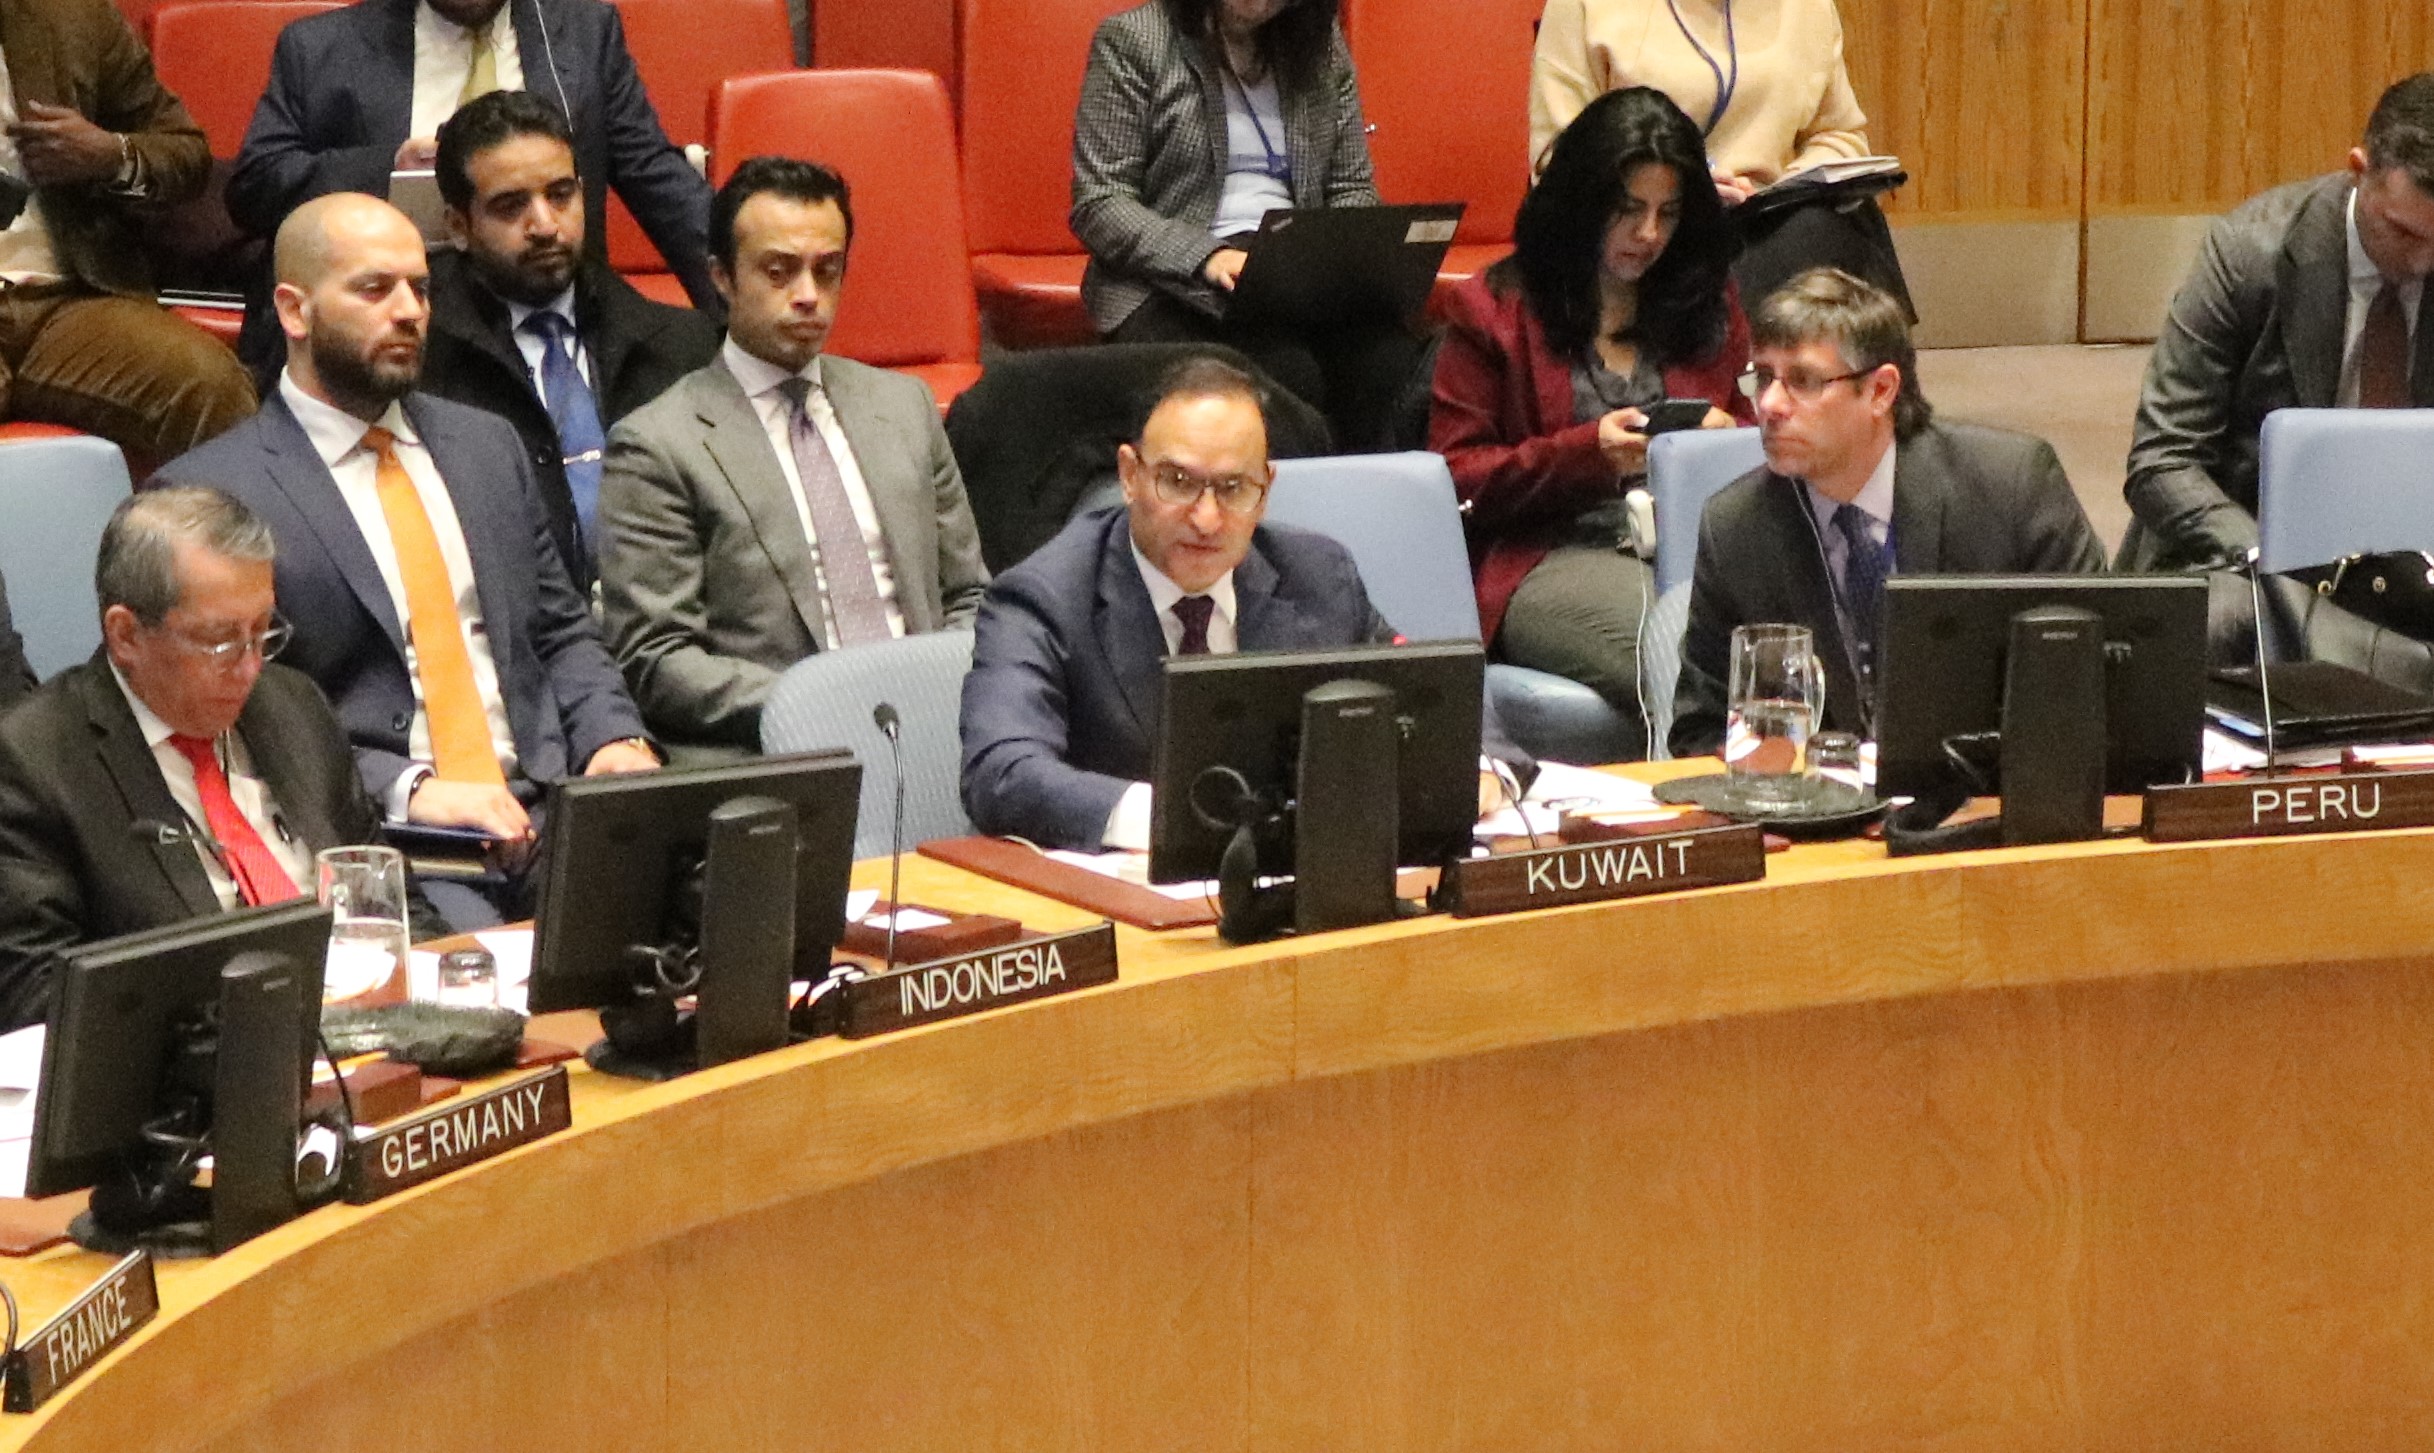 Kuwait's Permanent Representative at the UN Ambassador Mansour Al-Otaibi, during the session of the UN Security Council (UNSC) on Central African Republic